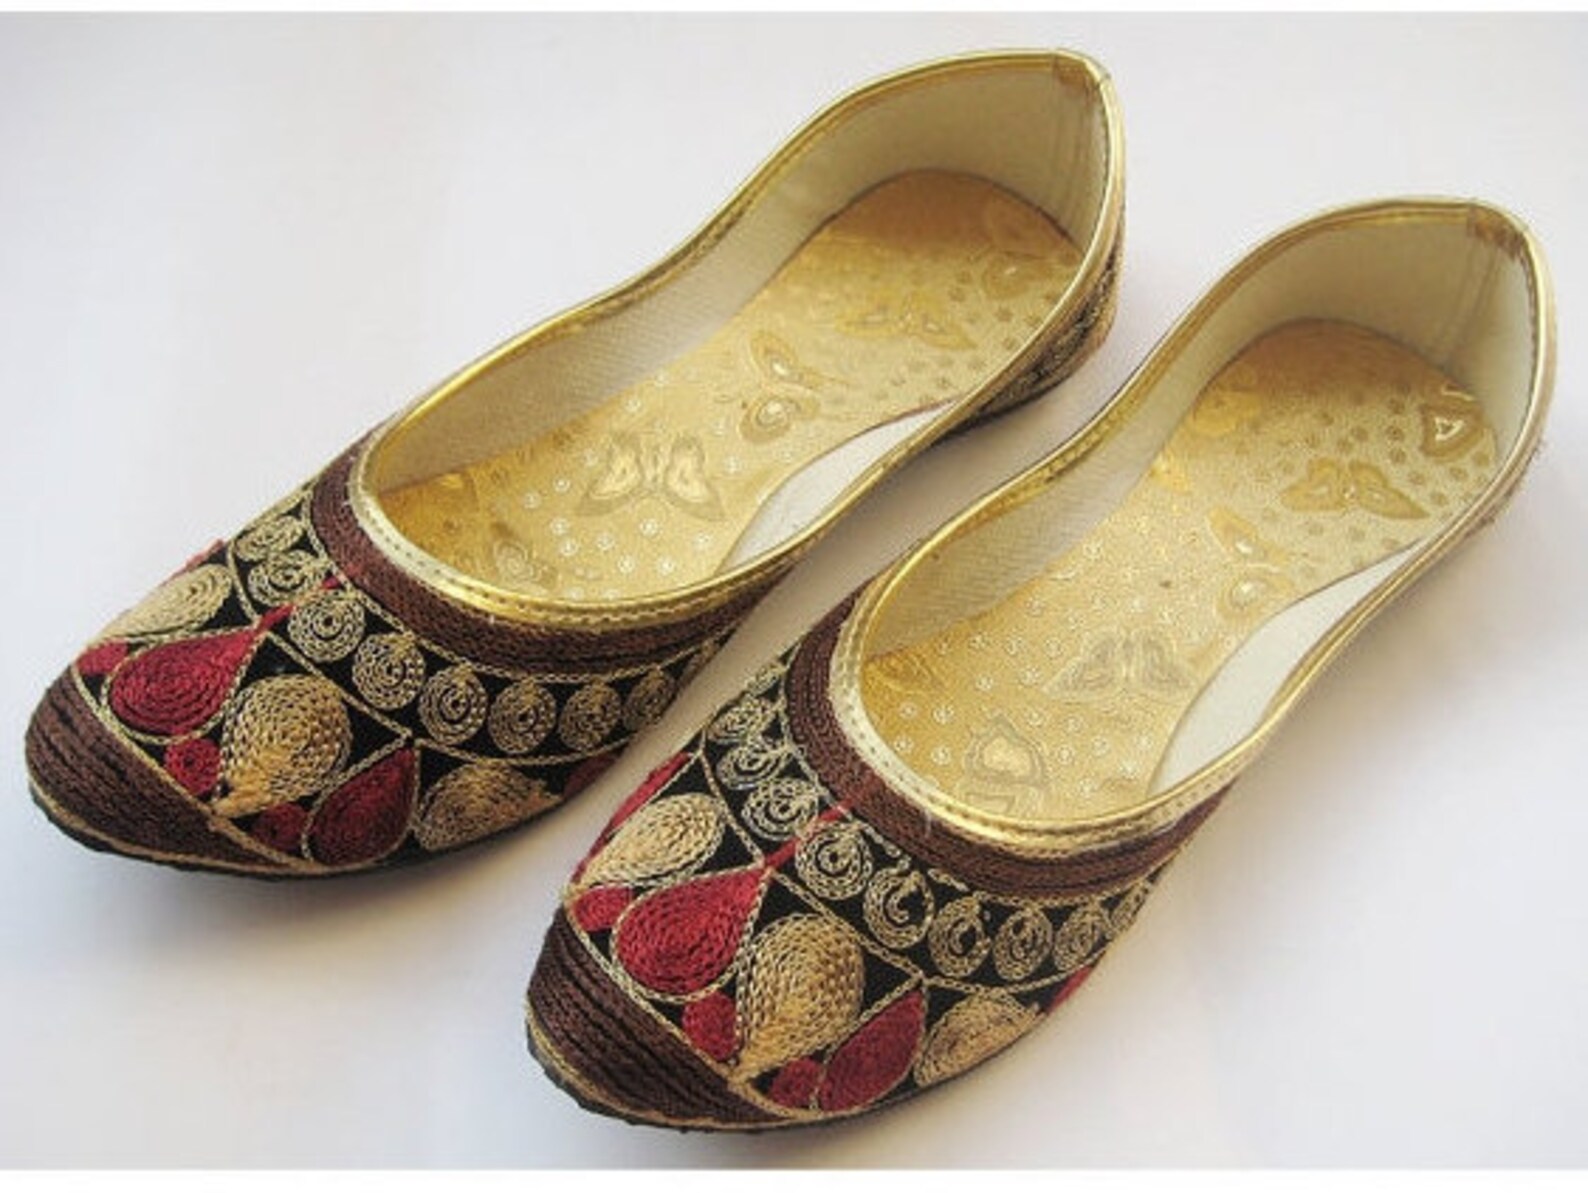 us size 8.5 - deep red women flat shoes, multi color ballet flats, red embroidery shoes, women slip on shoes, ethnic shoes, indi